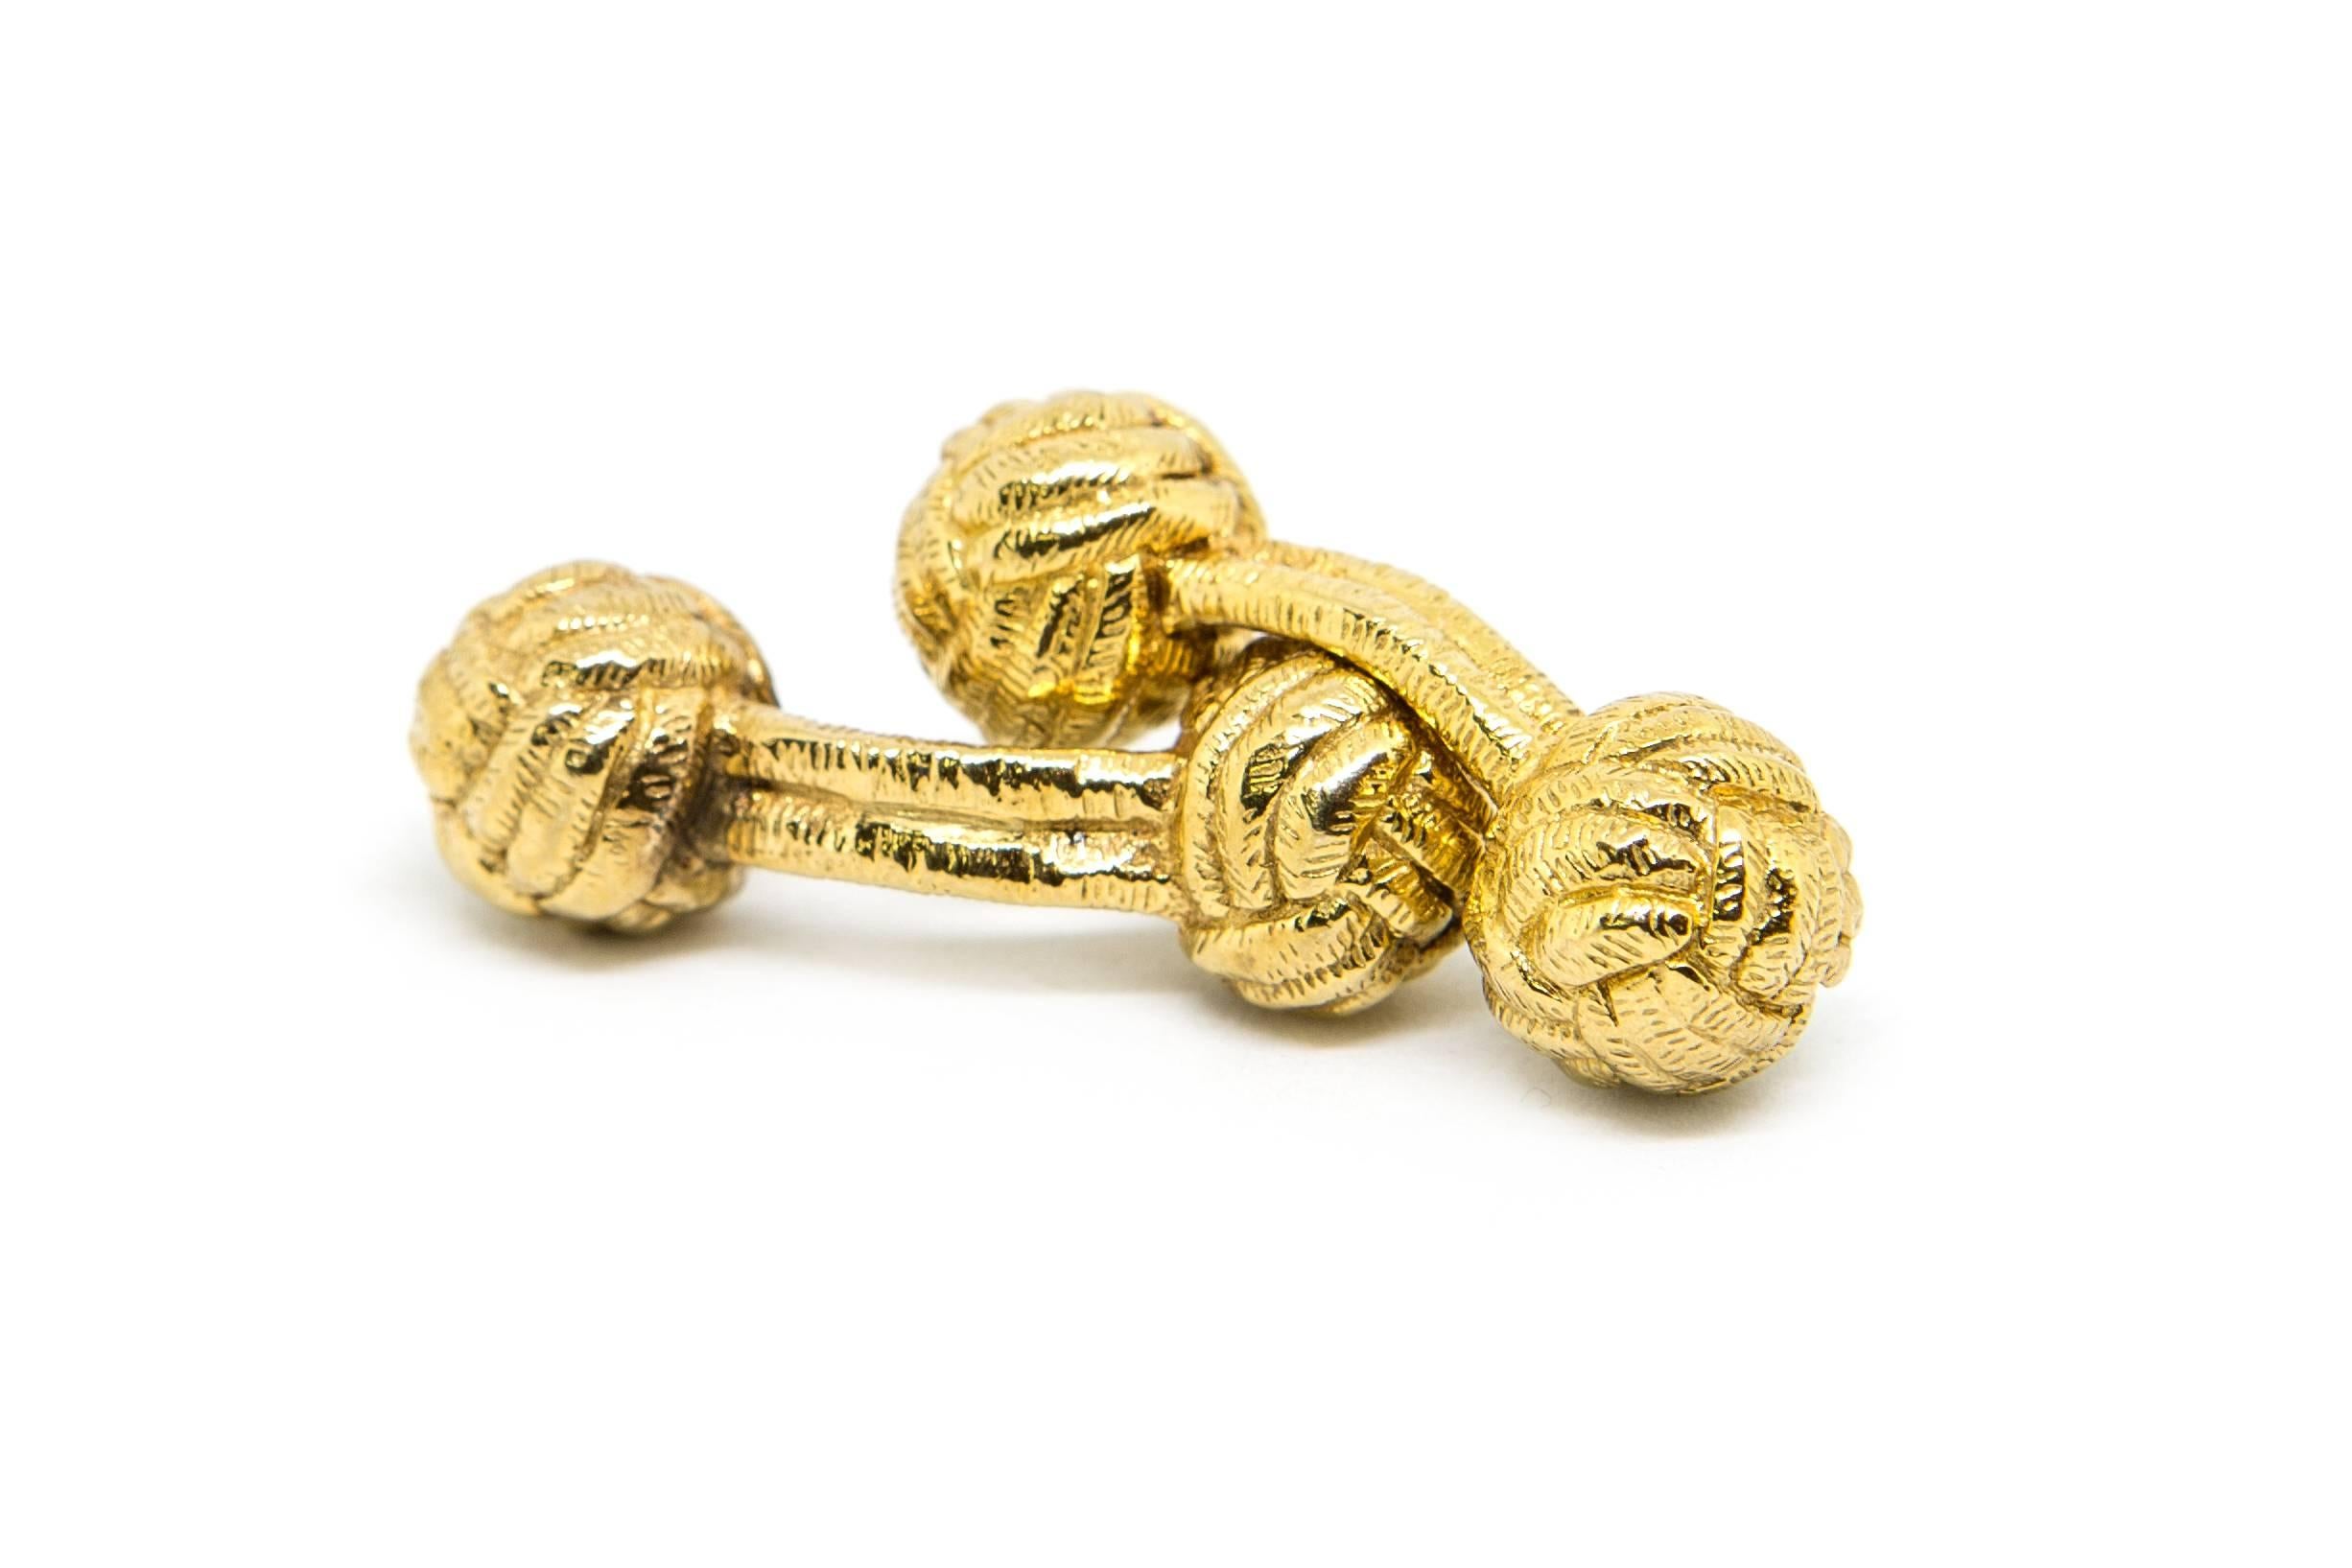 A pair of 9K yellow gold woven knot cufflinks. London 1989 by Theo Fennel.

	•	Knots 9.5 mm in diameter
	•	Length: 26.5 mm
	•	Total weight: 16.7 grams

Price: £ 490
